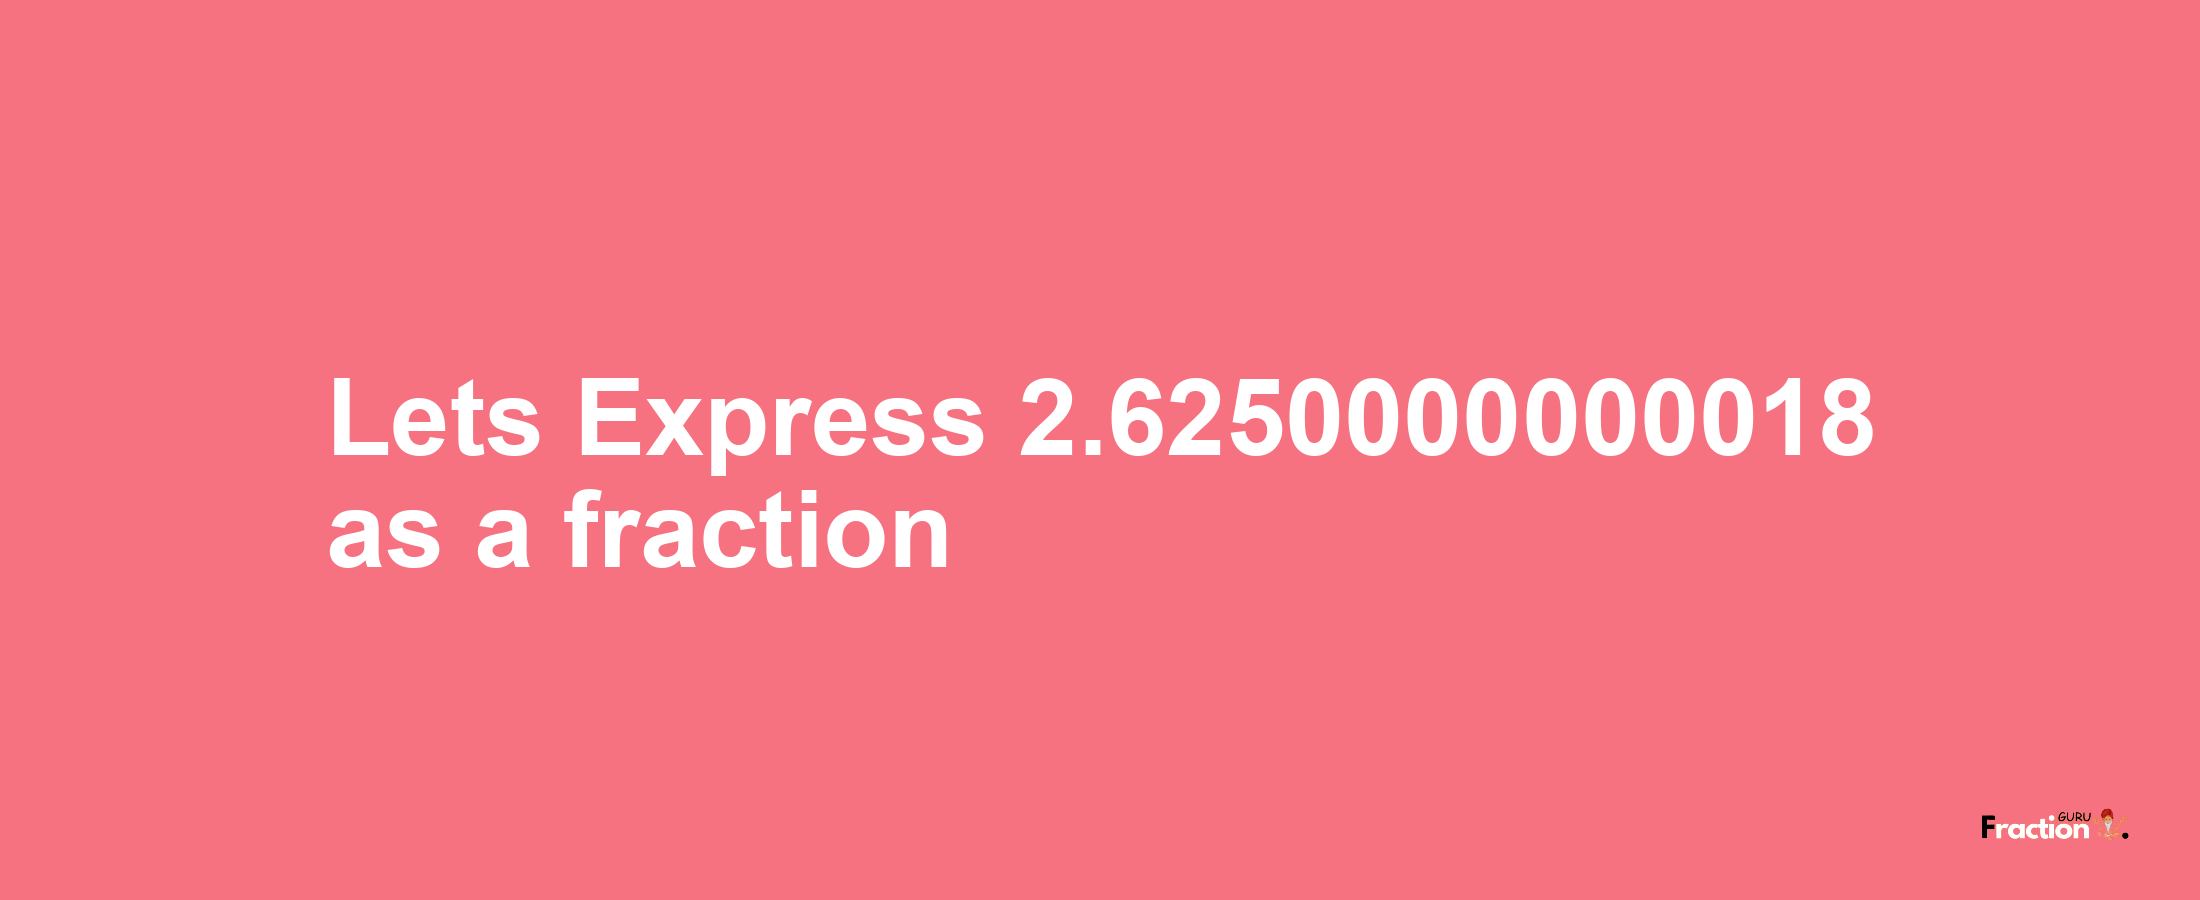 Lets Express 2.6250000000018 as afraction